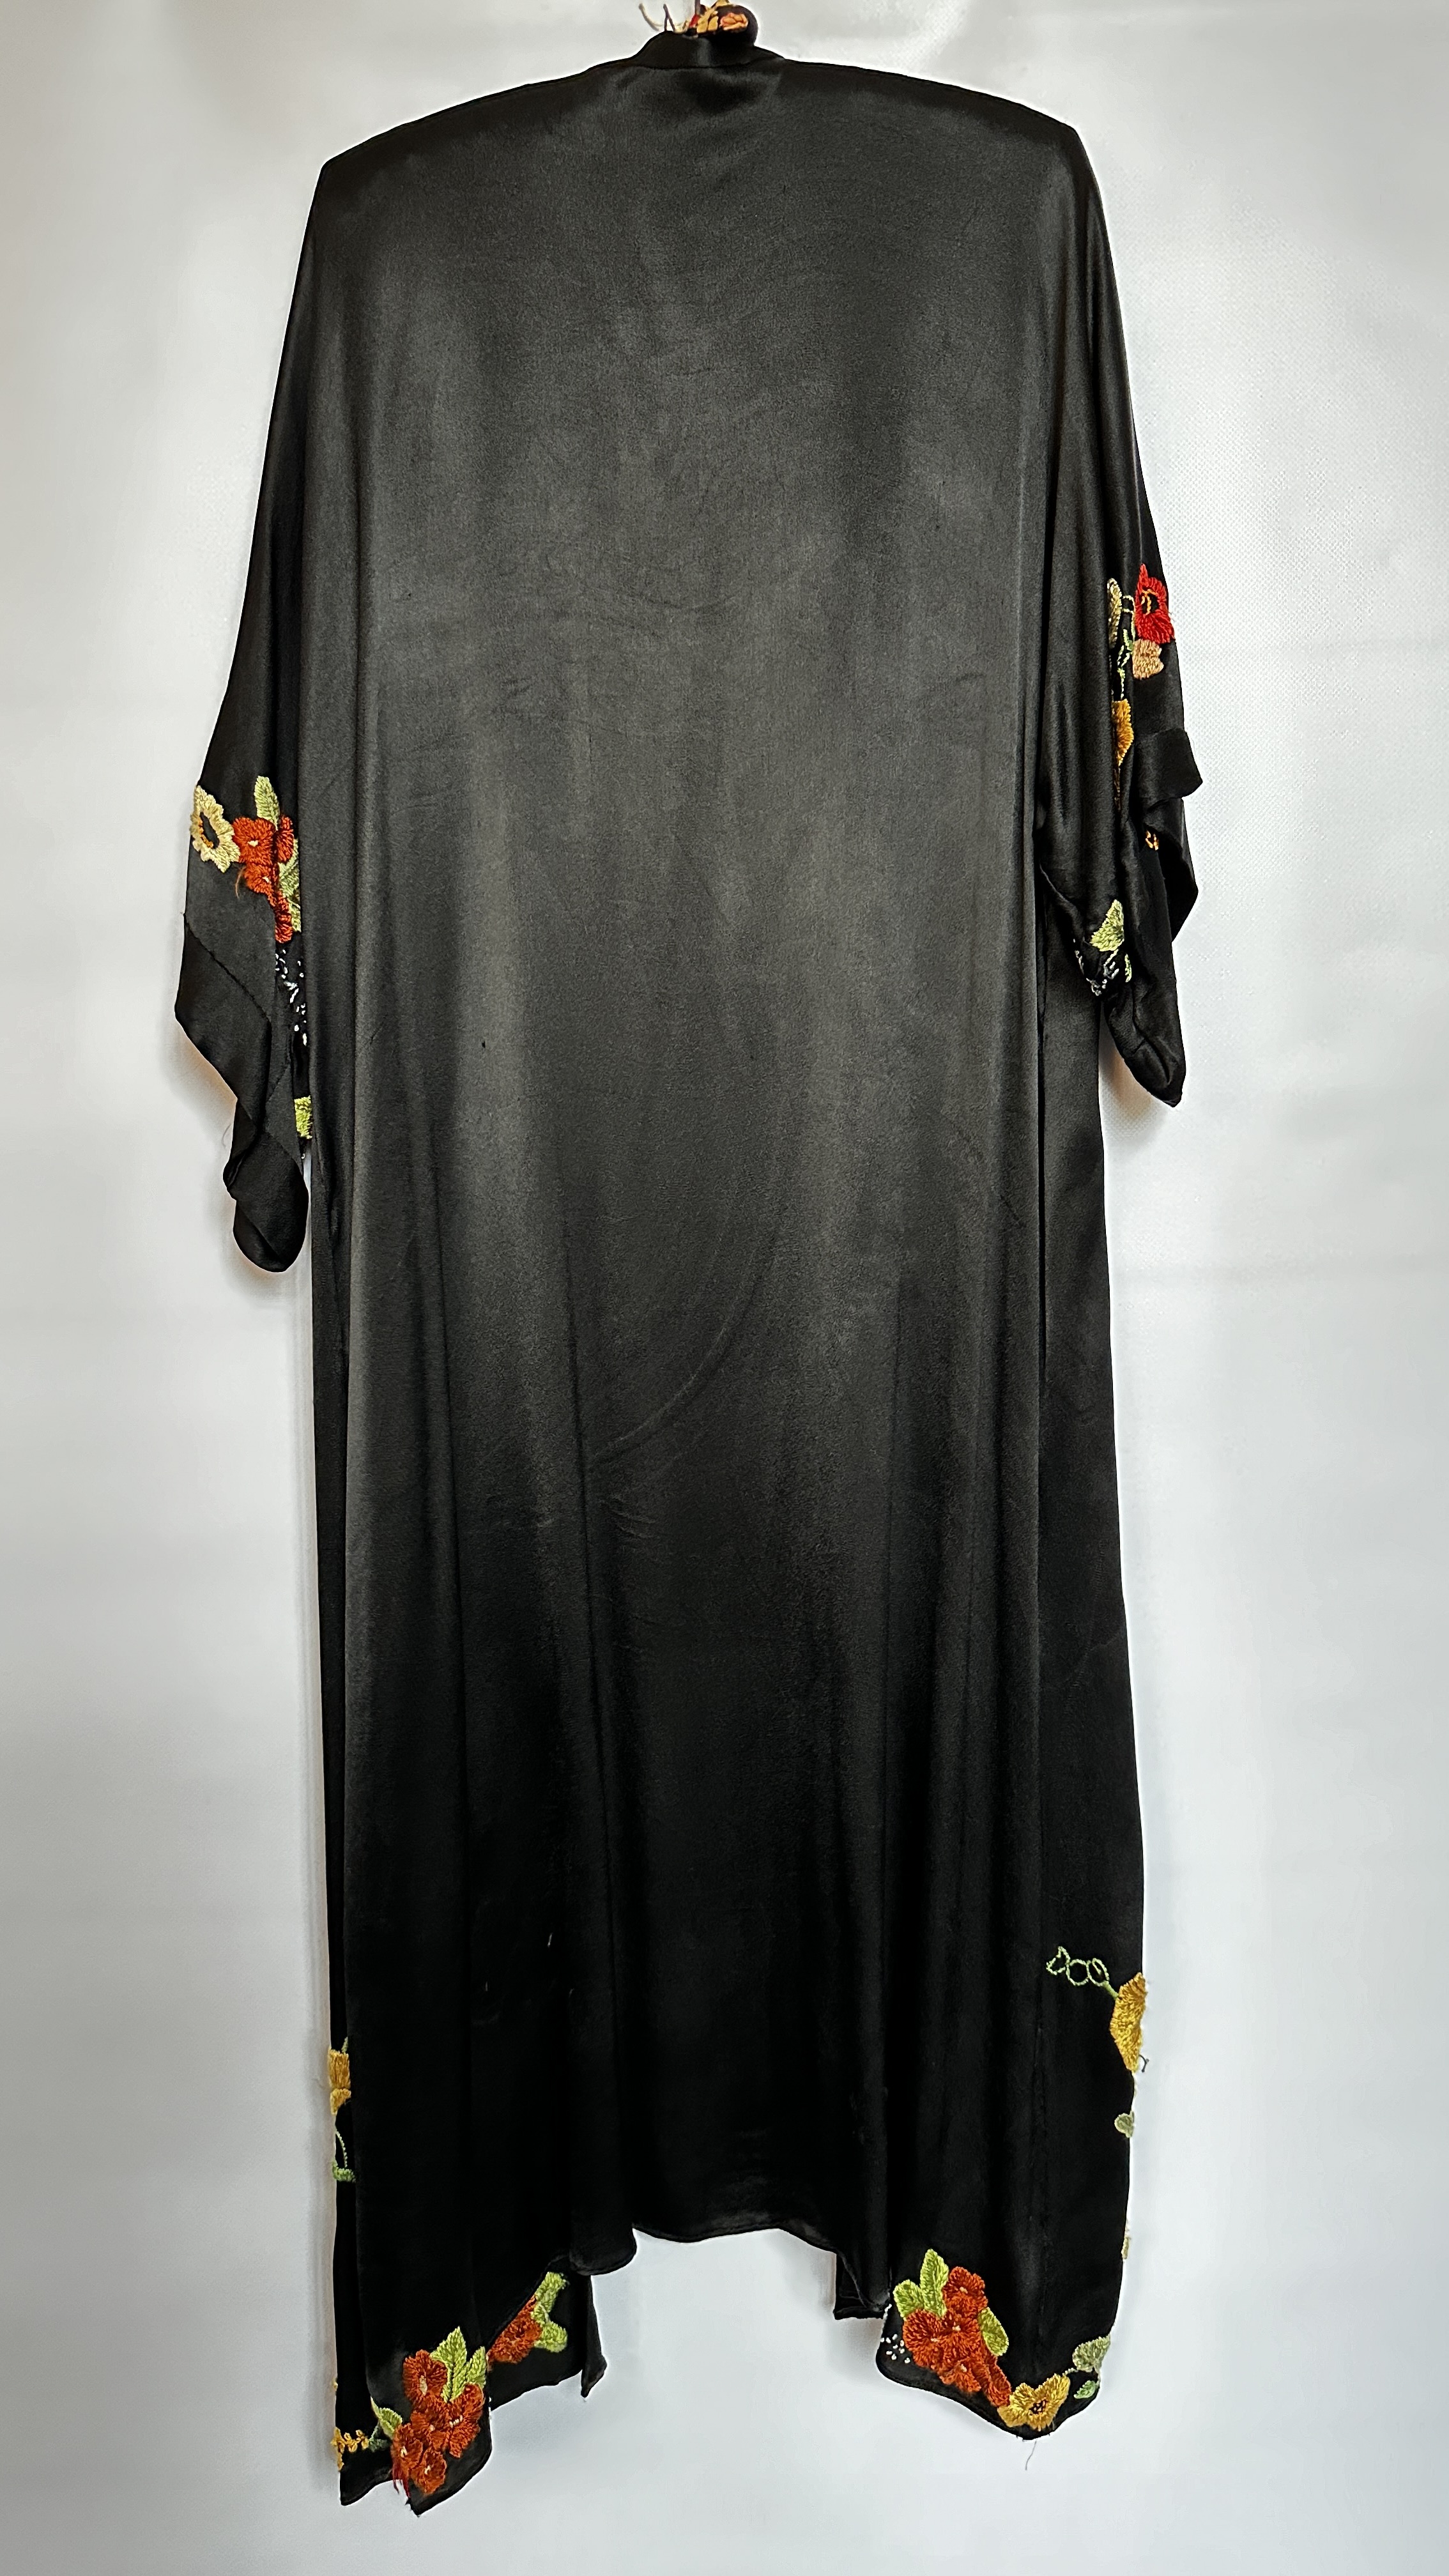 1920S BLACK SATIN ¾ LENGTH COAT WITH NASTURTIUM EMBROIDERY TO SLEEVES AND HEMLINE - A/F CONDITION, - Image 11 of 15